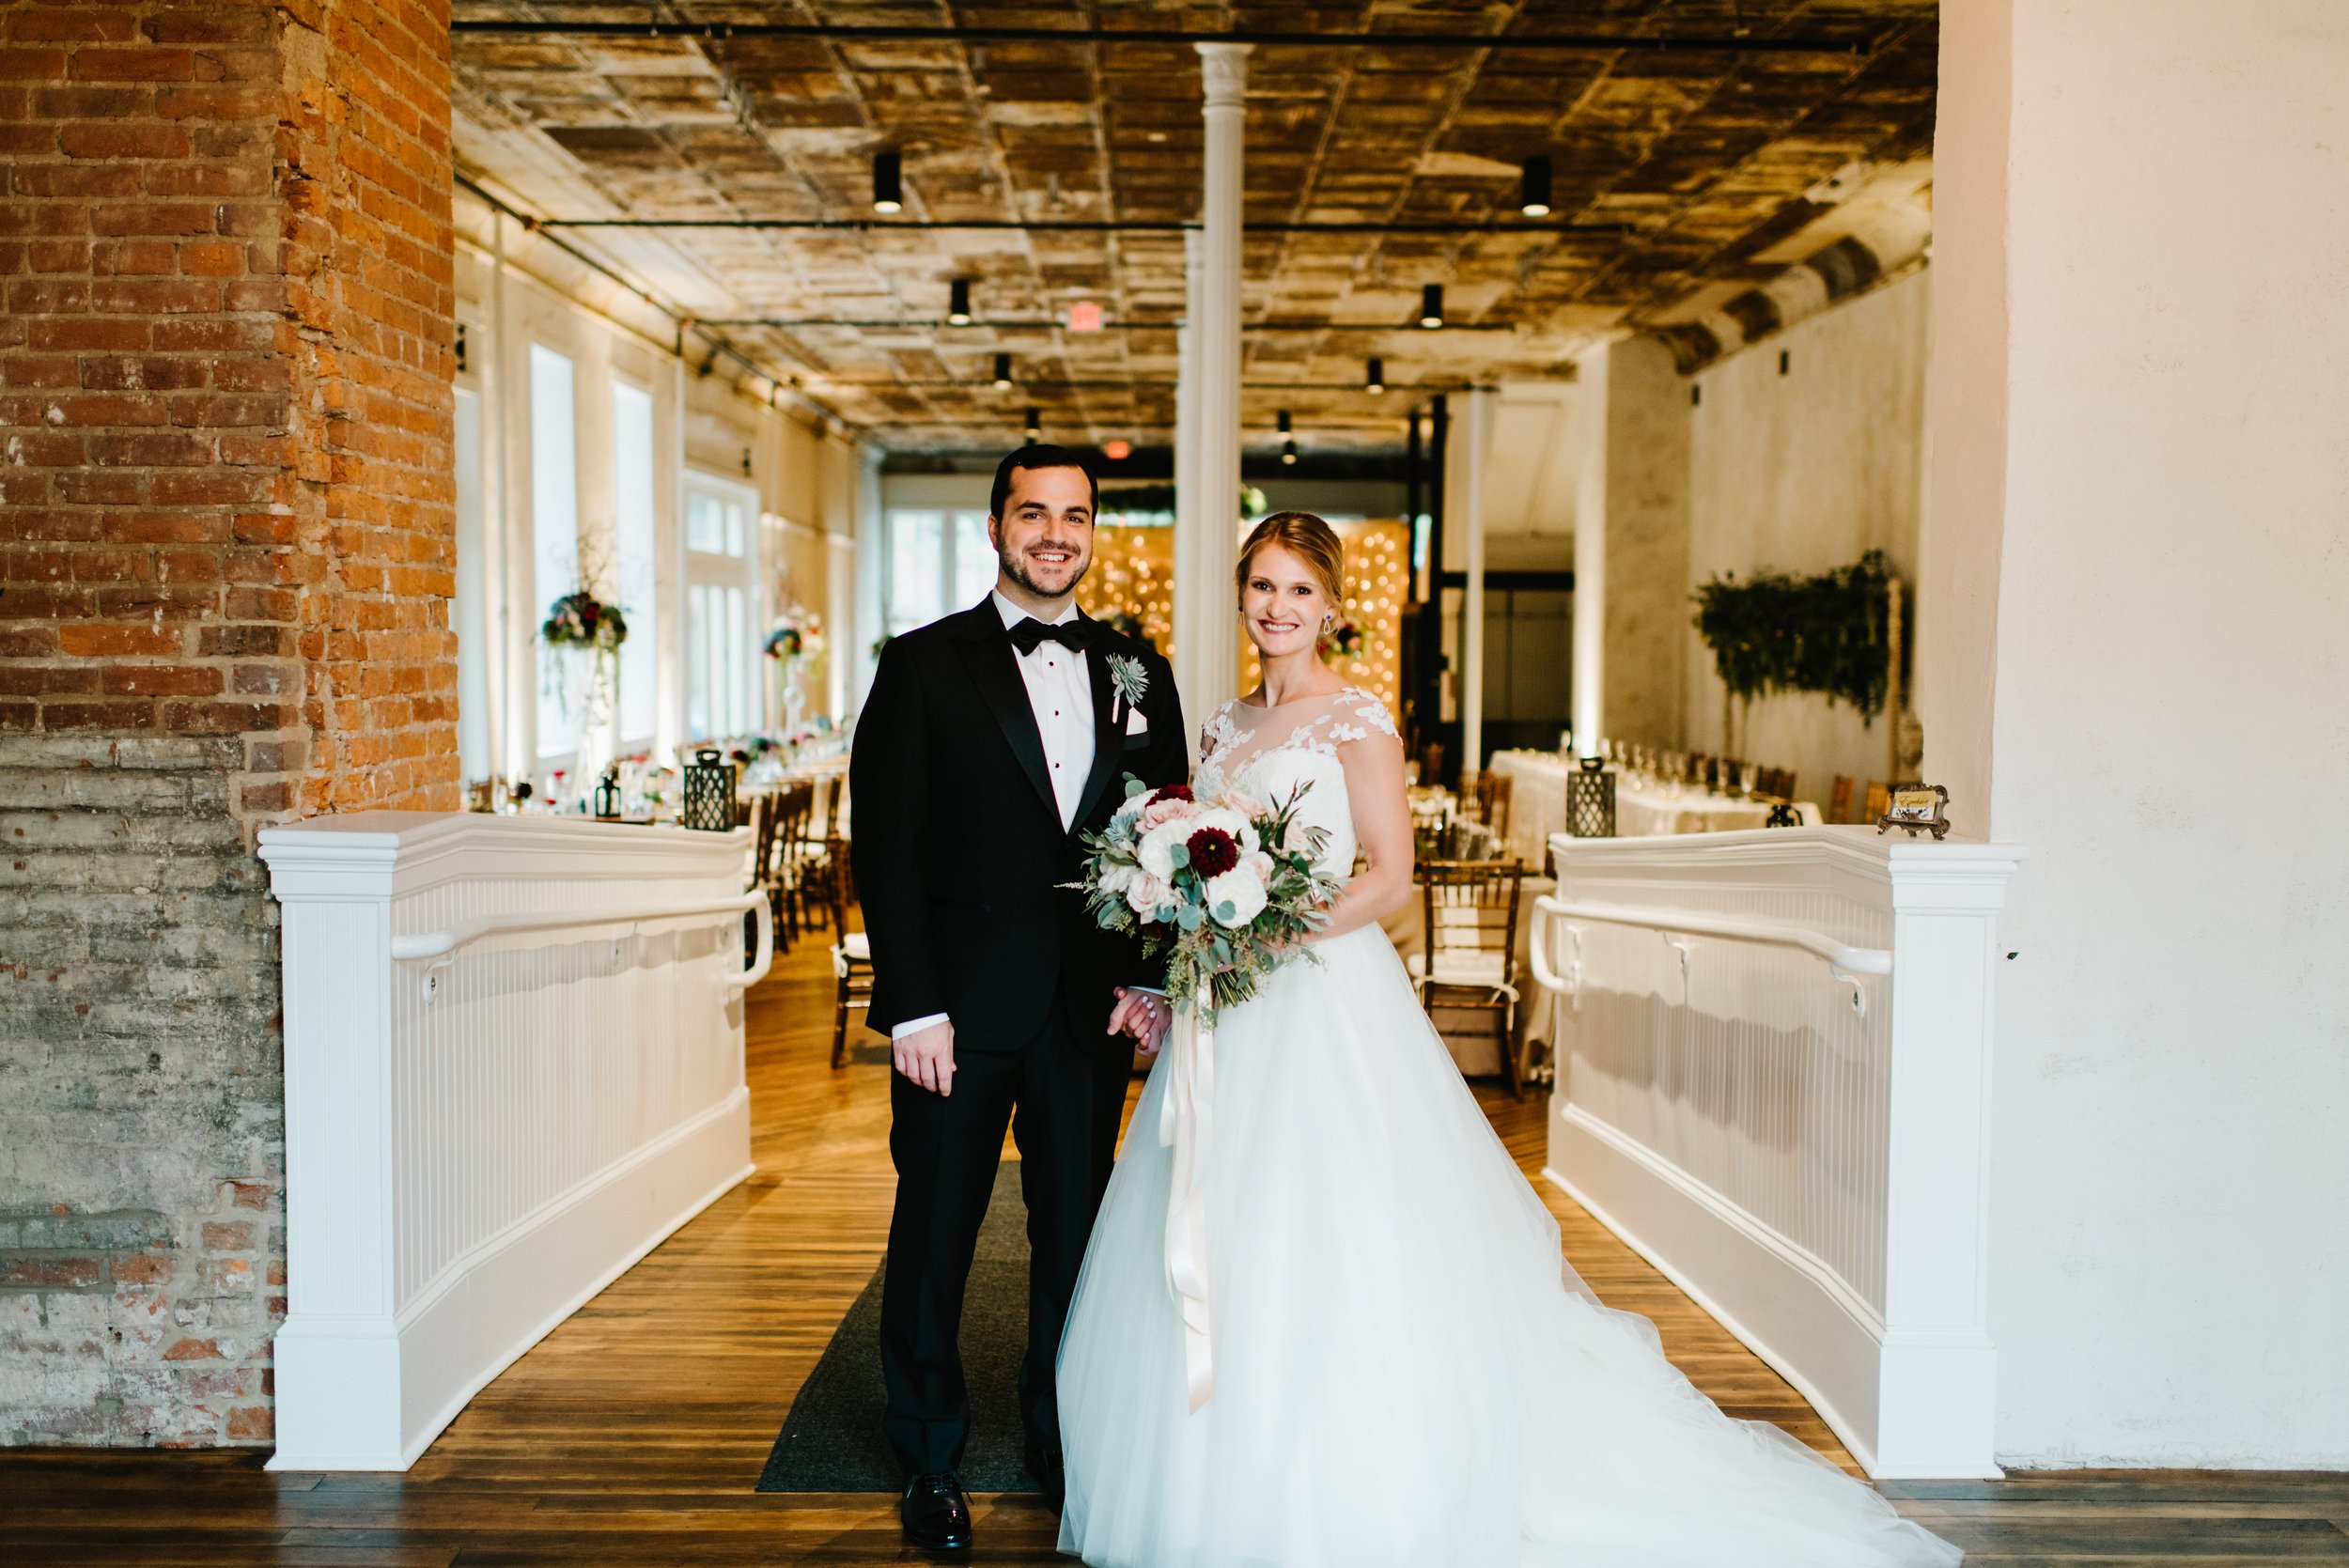 Bride and groom portrait in Excelsior lobby wedding venue